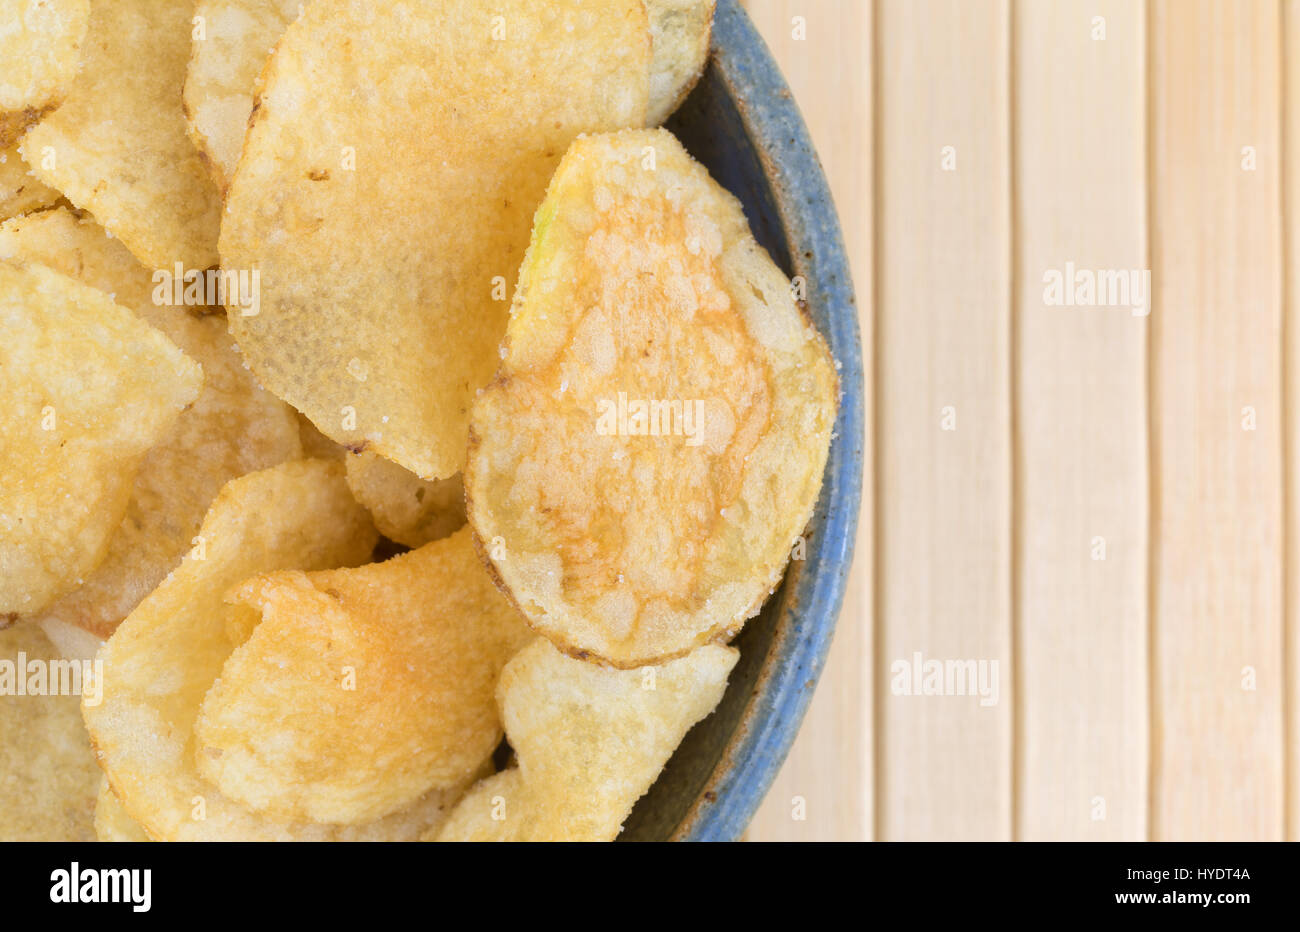 Top close view of an old stoneware bowl filled with salt and vinegar flavored potato chips on wood place mat. Stock Photo